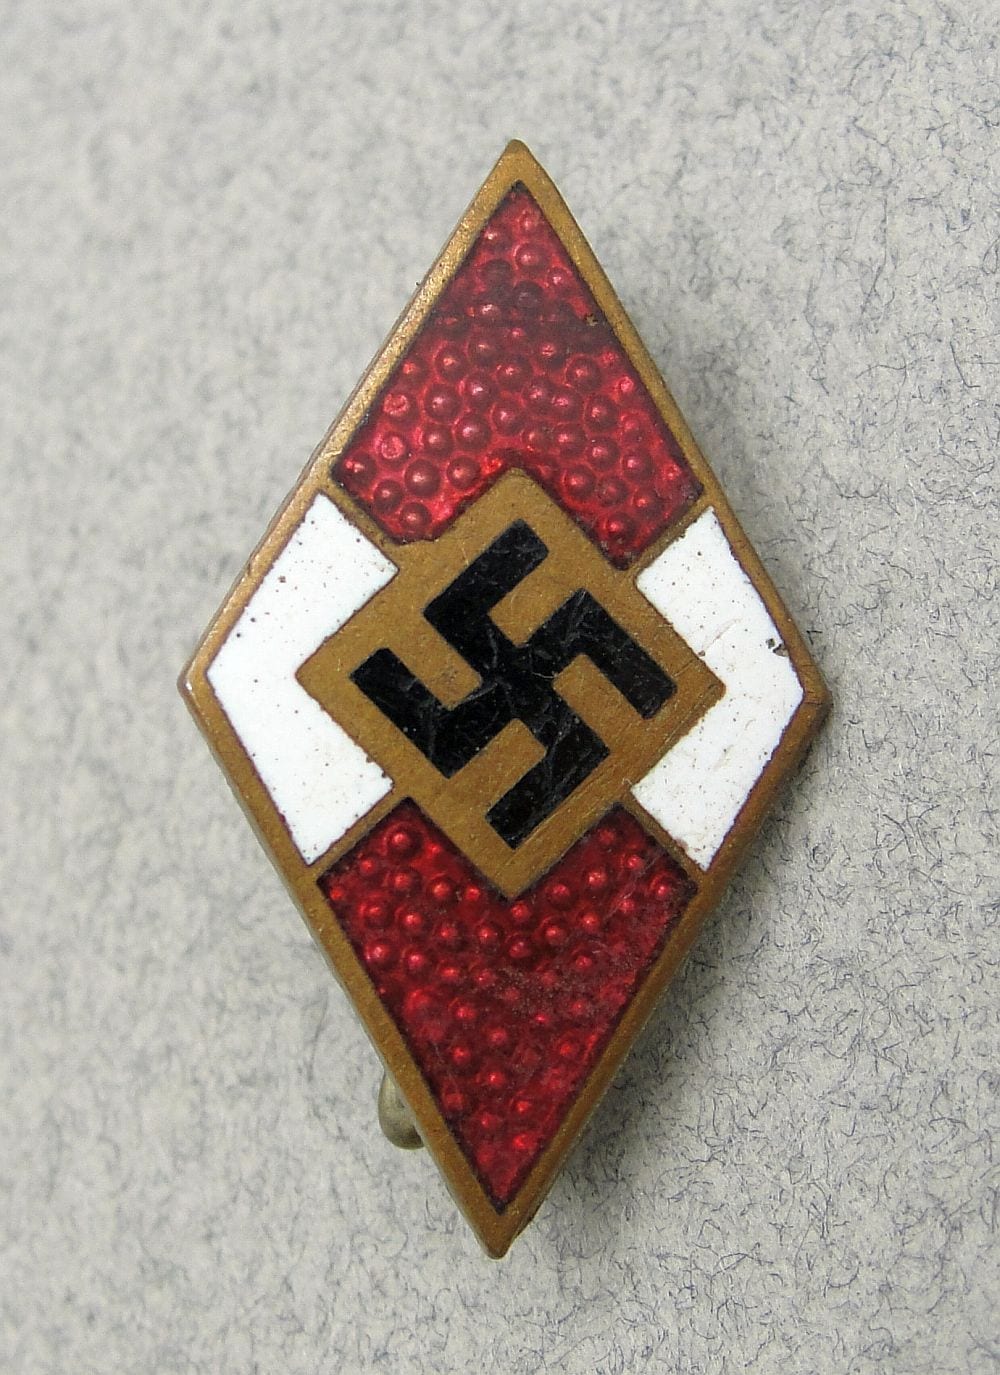 Hitler Youth Membership Badge by RZM M1/159